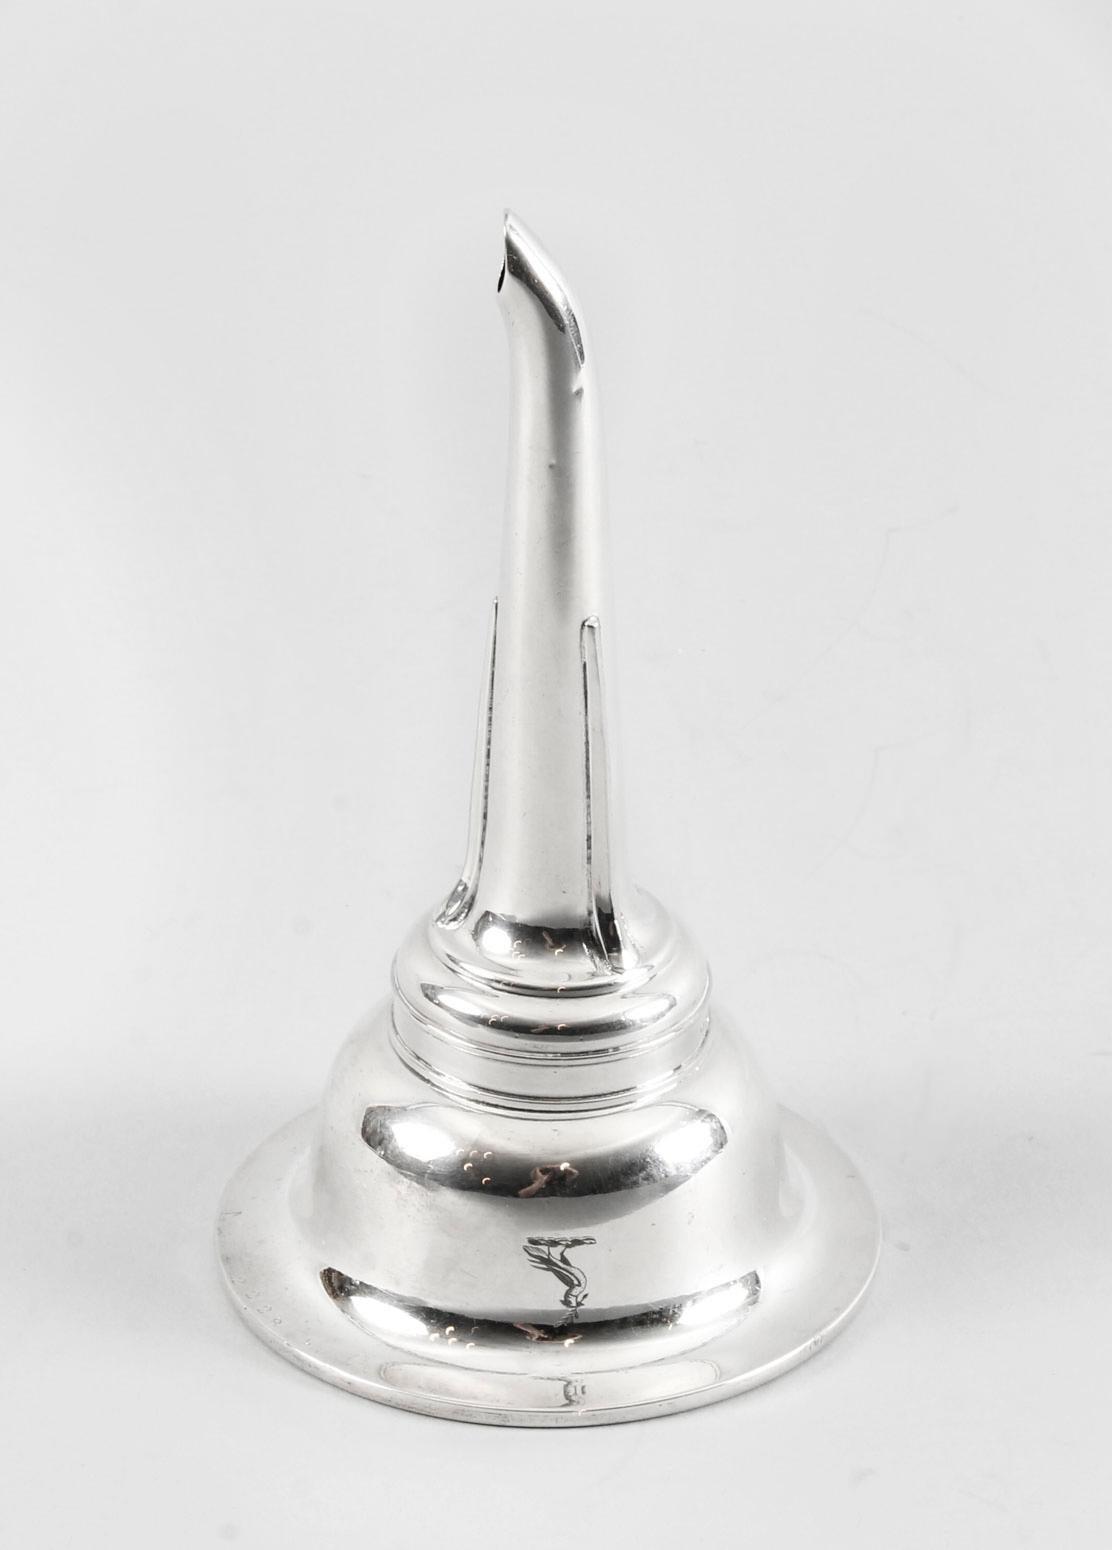 This is a wonderful antique English silver plate wine funnel that bears the makers marks of the celebrated silversmith Elkington, circa 1870 in date.

It is beautifully made in silver plate with the original gilt interior. There is no mistaking